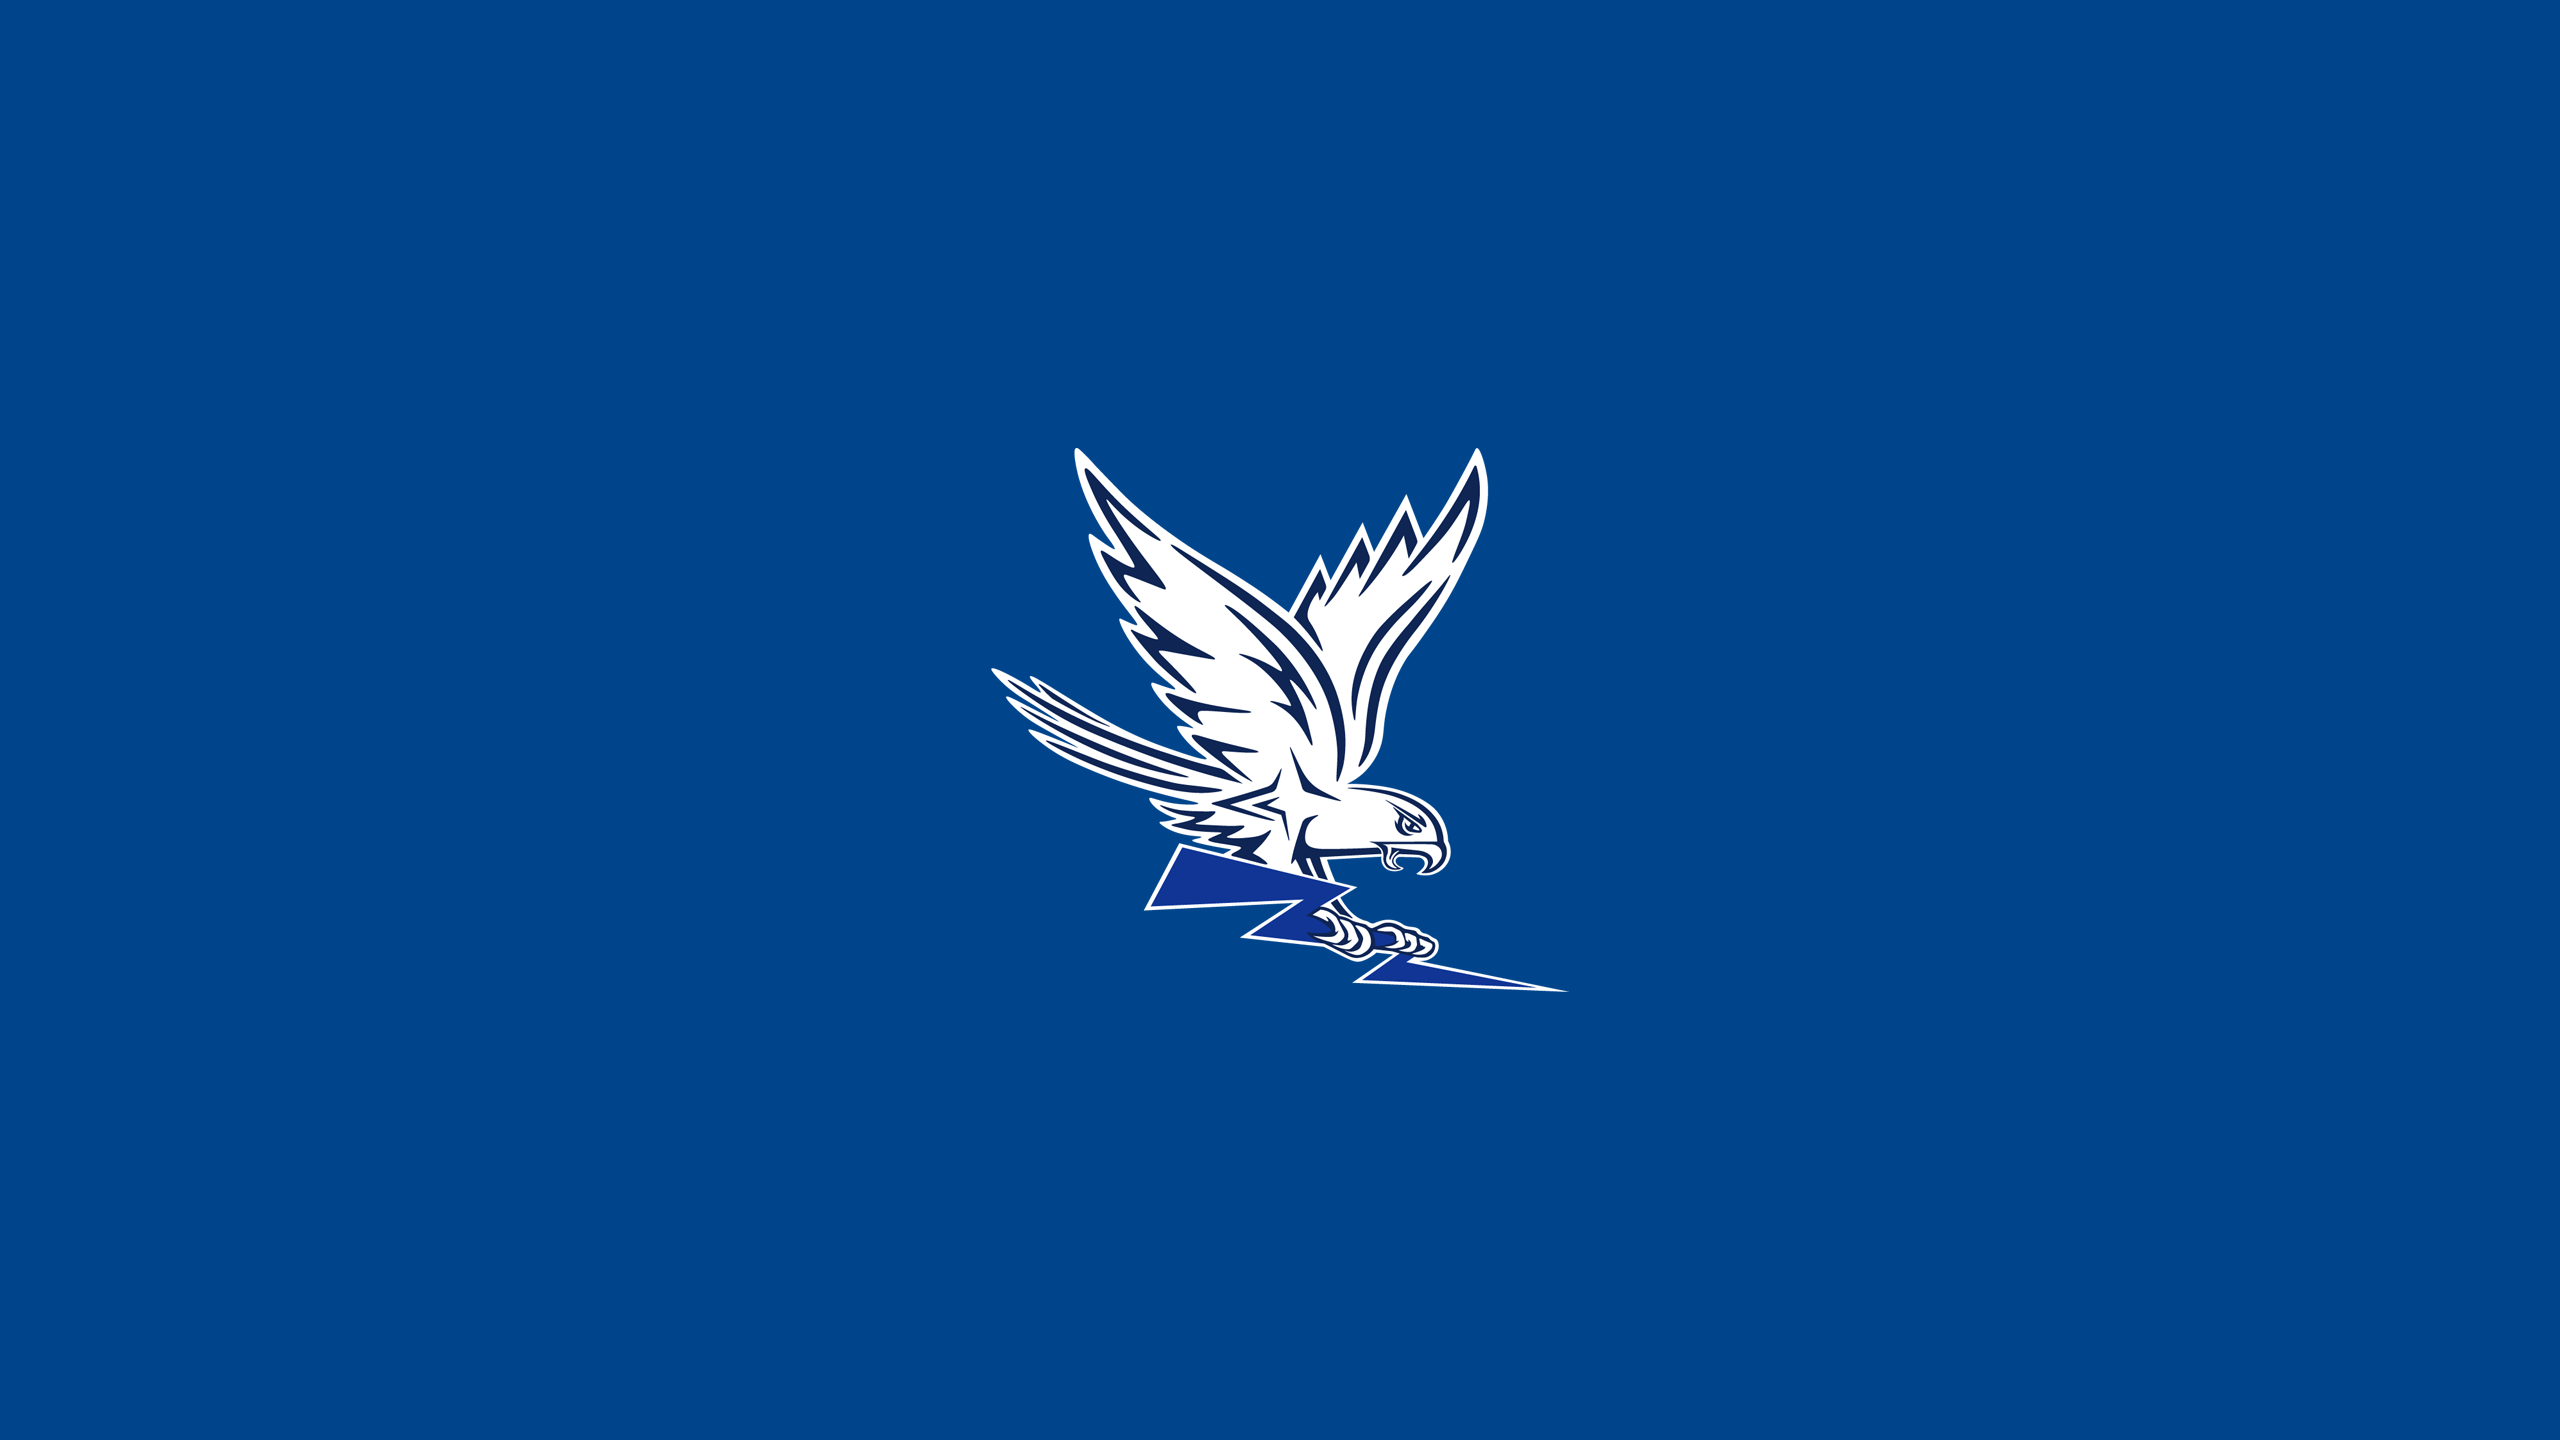 Air Force Falcons Football - NCAAF - Square Bettor